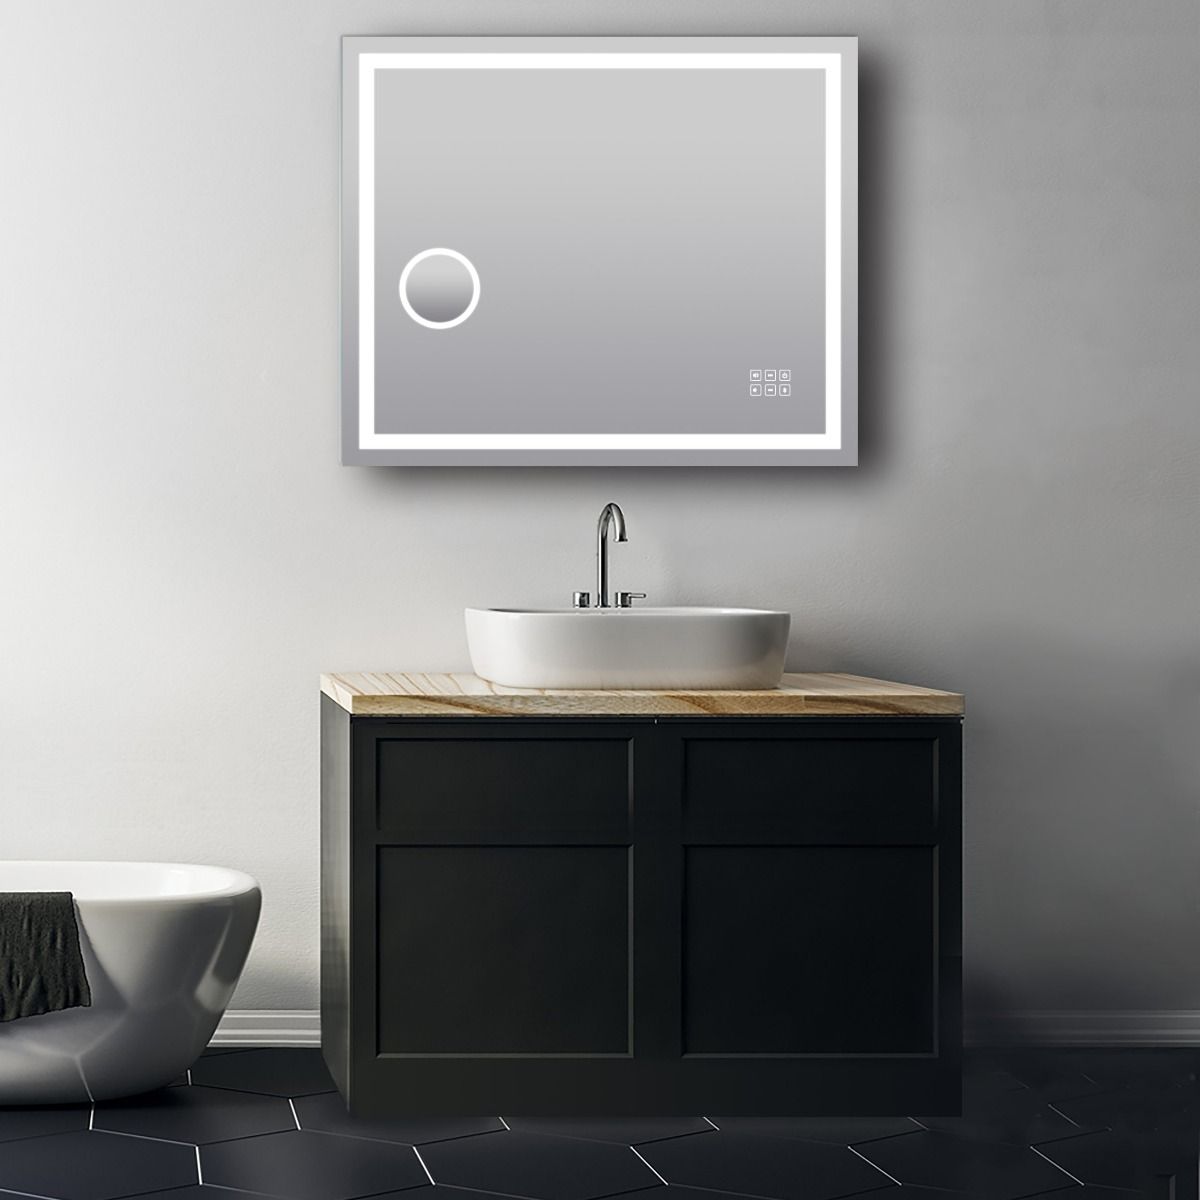 ART Smart LED Mirror with Magnifier